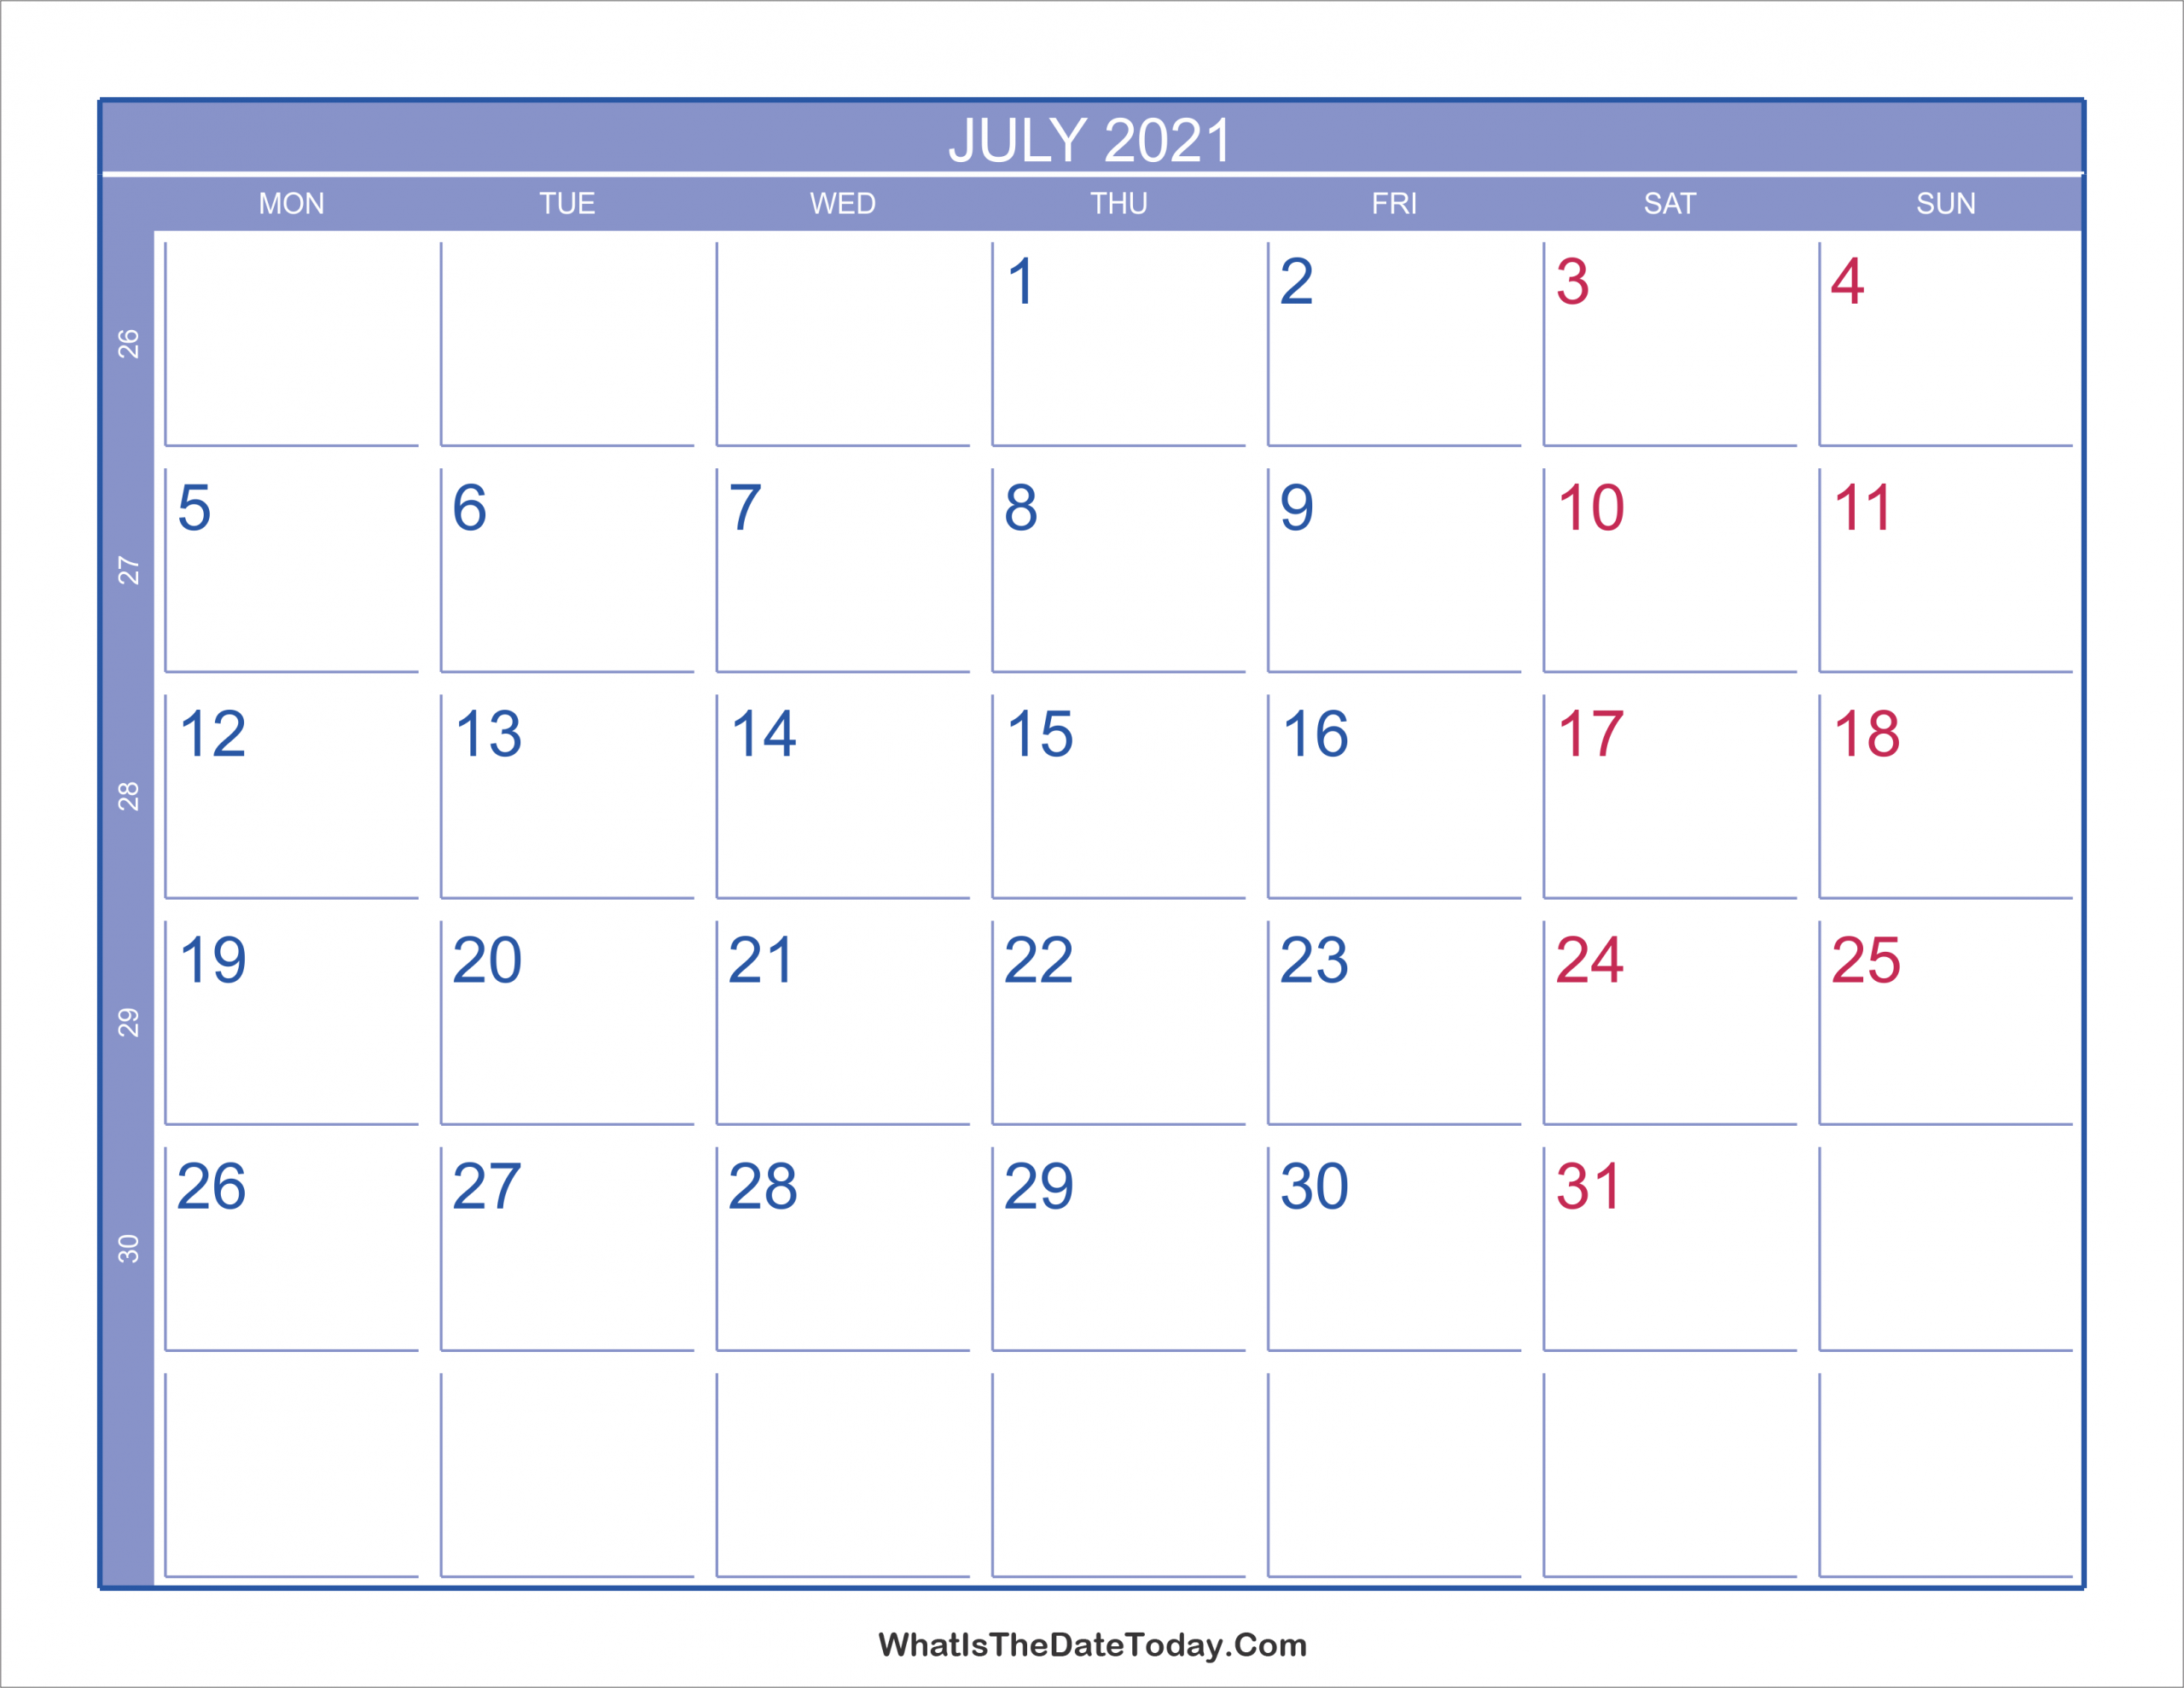 2021 July Calendar With Week Numbers | Whatisthedatetoday